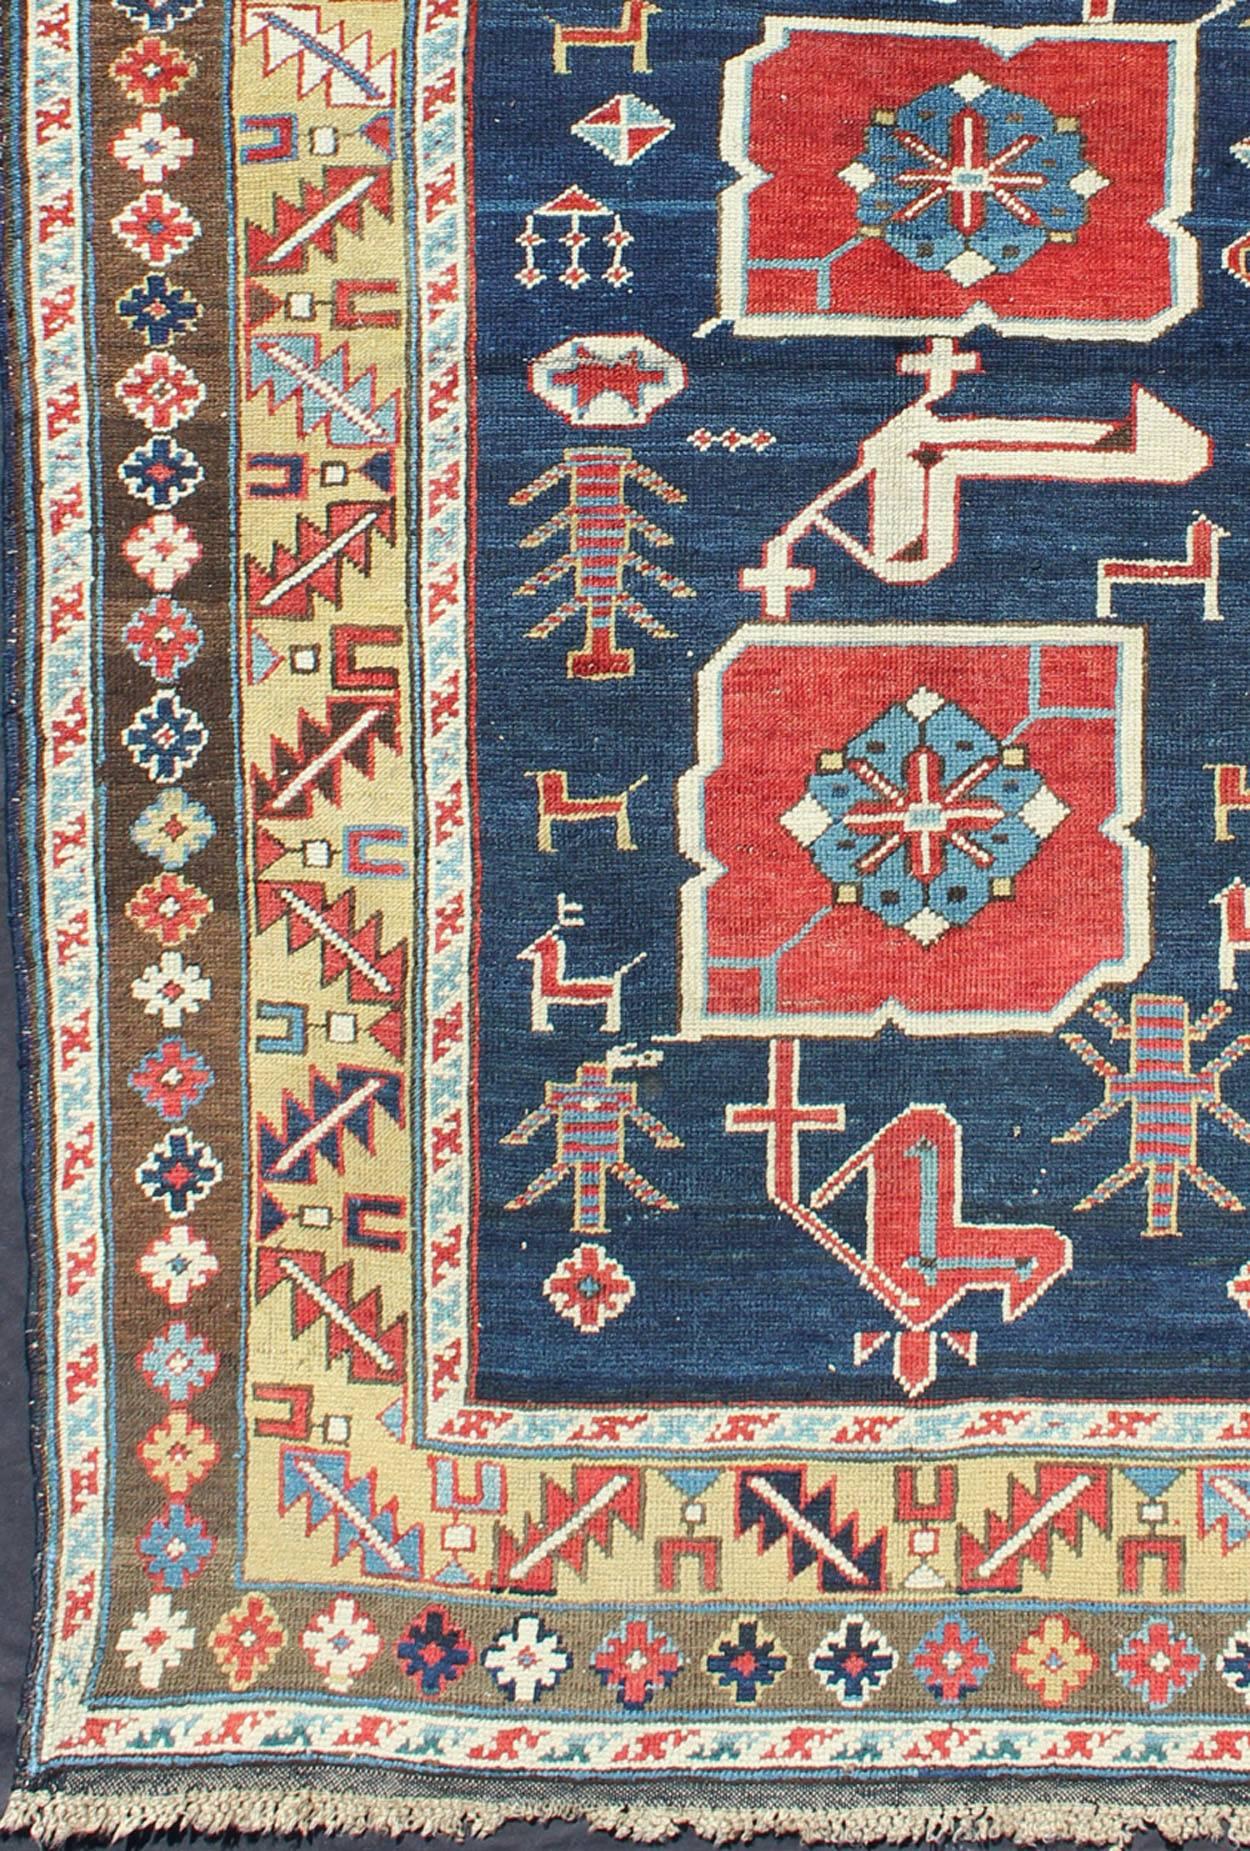 Antique Caucasian Karaqashli Rug in Blue Background and Yellow Border.
Woven in the Kuba district of the northeast Caucasus Mountain, this Karagashli features a distinctive combination of bold geometry enhanced by a beautifully saturated color